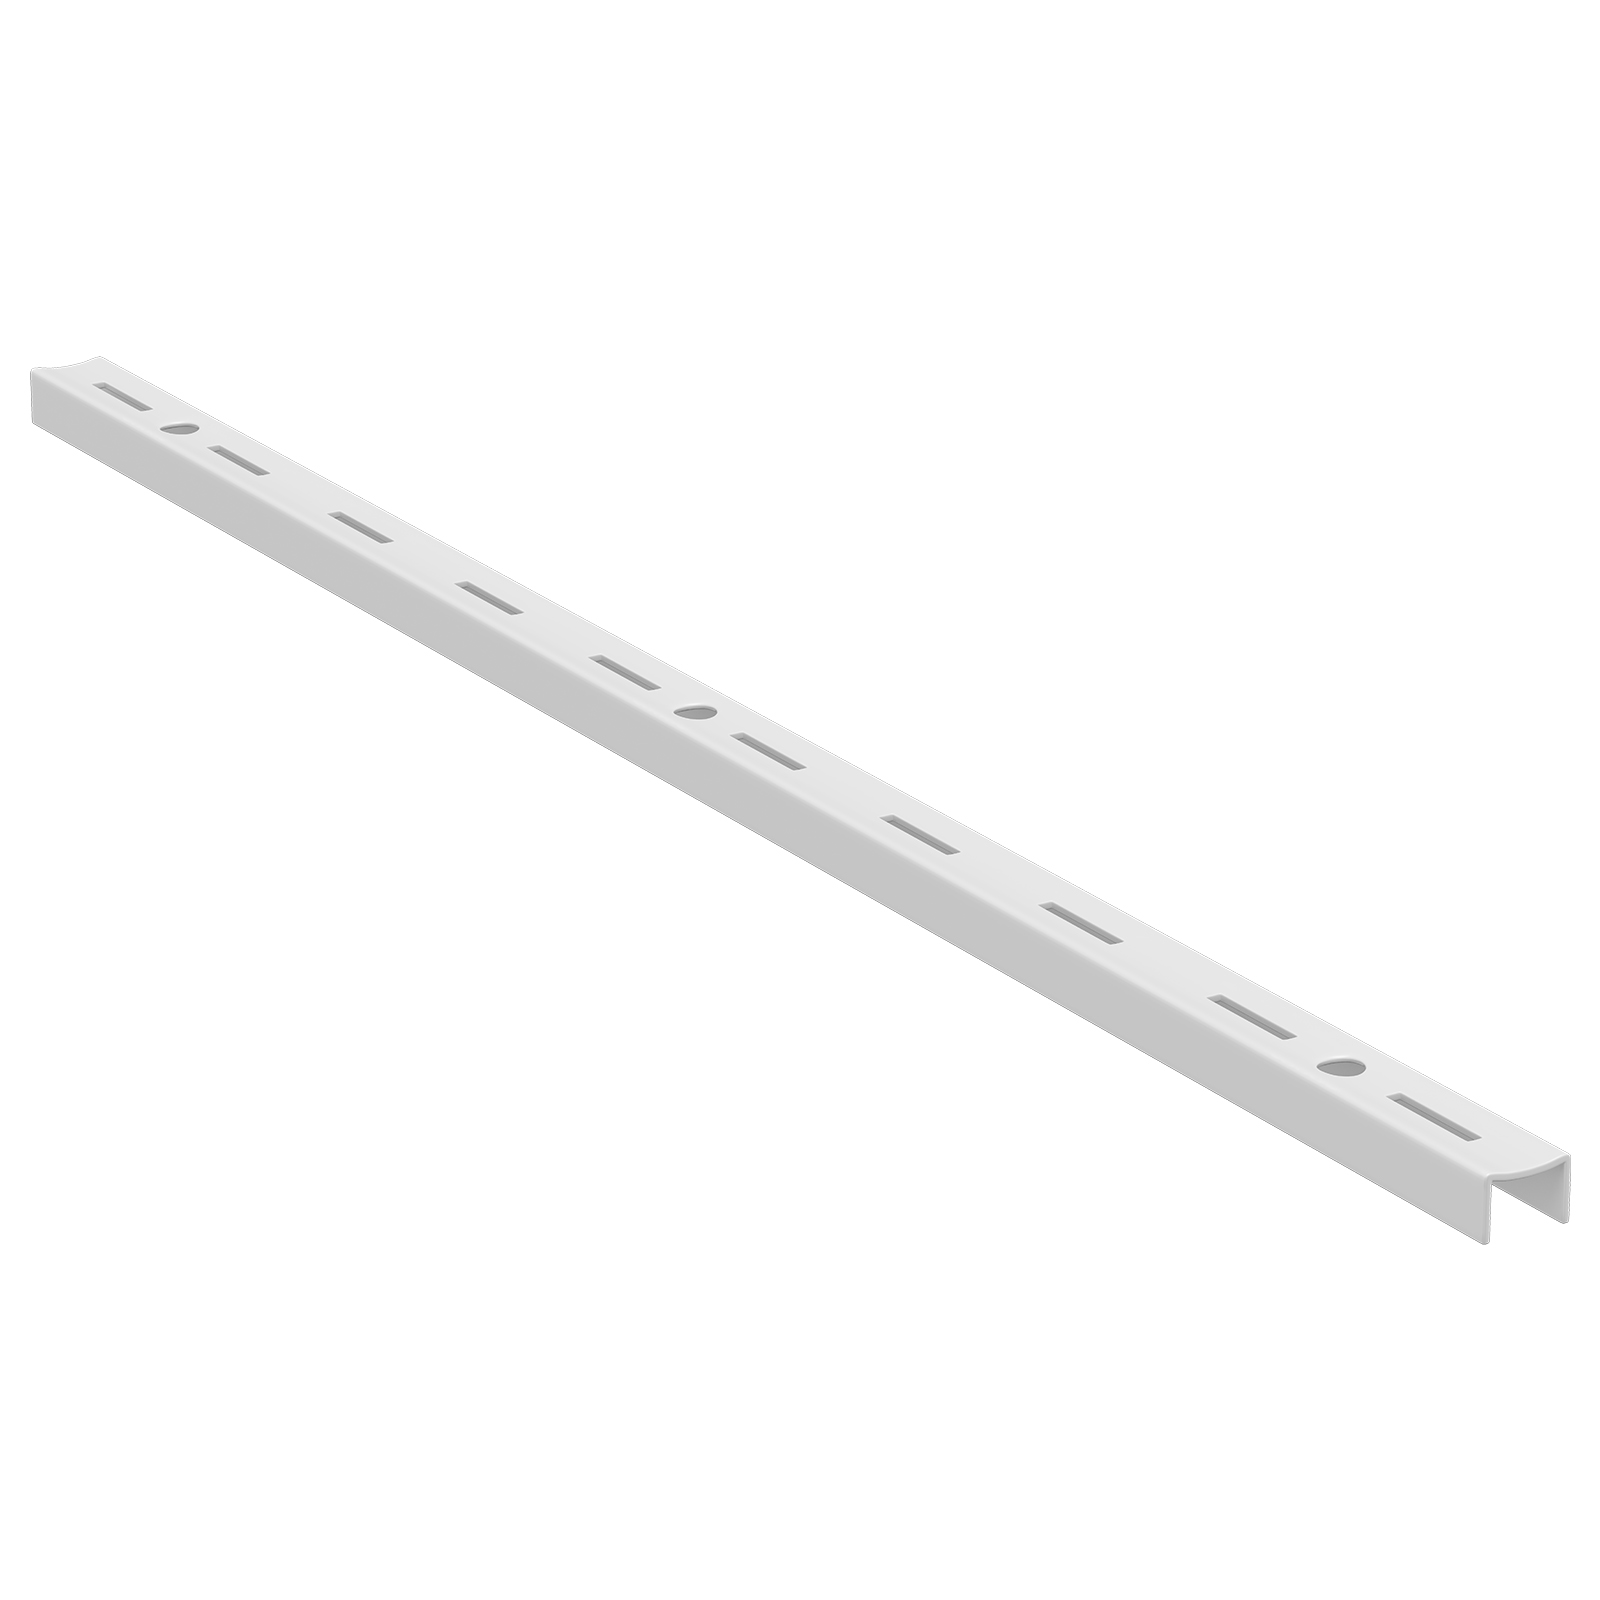 Home Solutions Single Slot Wall Strip White 500mm